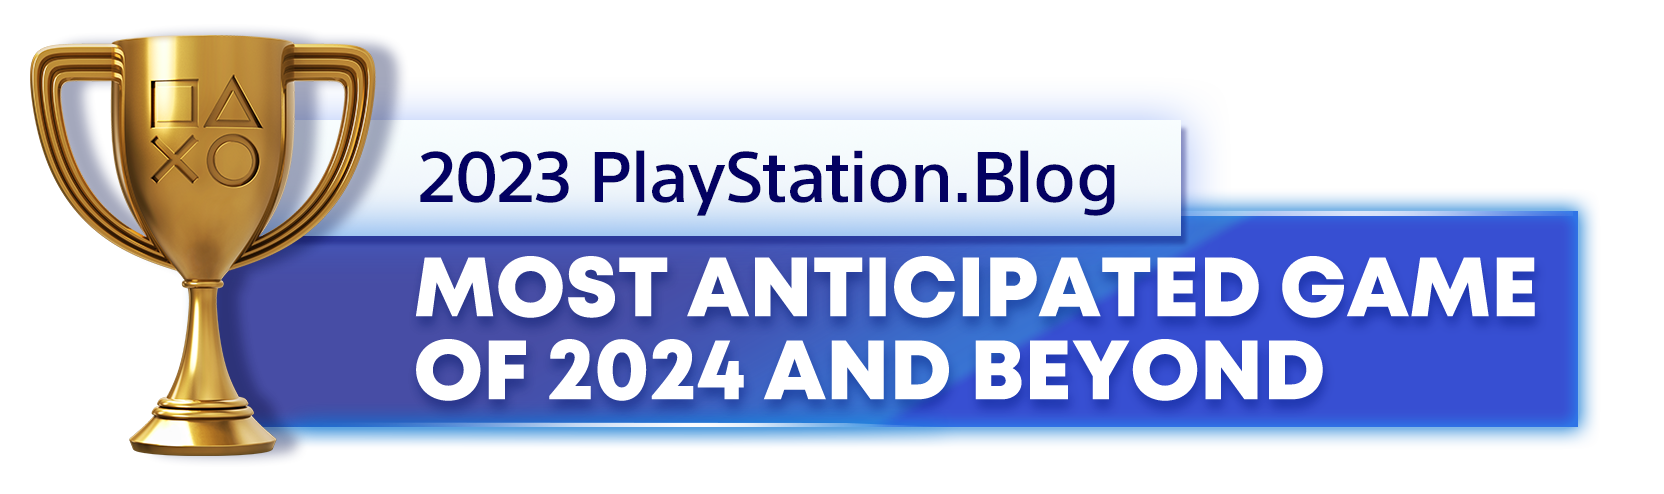  " Gold Trophy for the 2023 PlayStation Blog Most Anticipated PlayStation Game of 2024 and Beyond Winner"